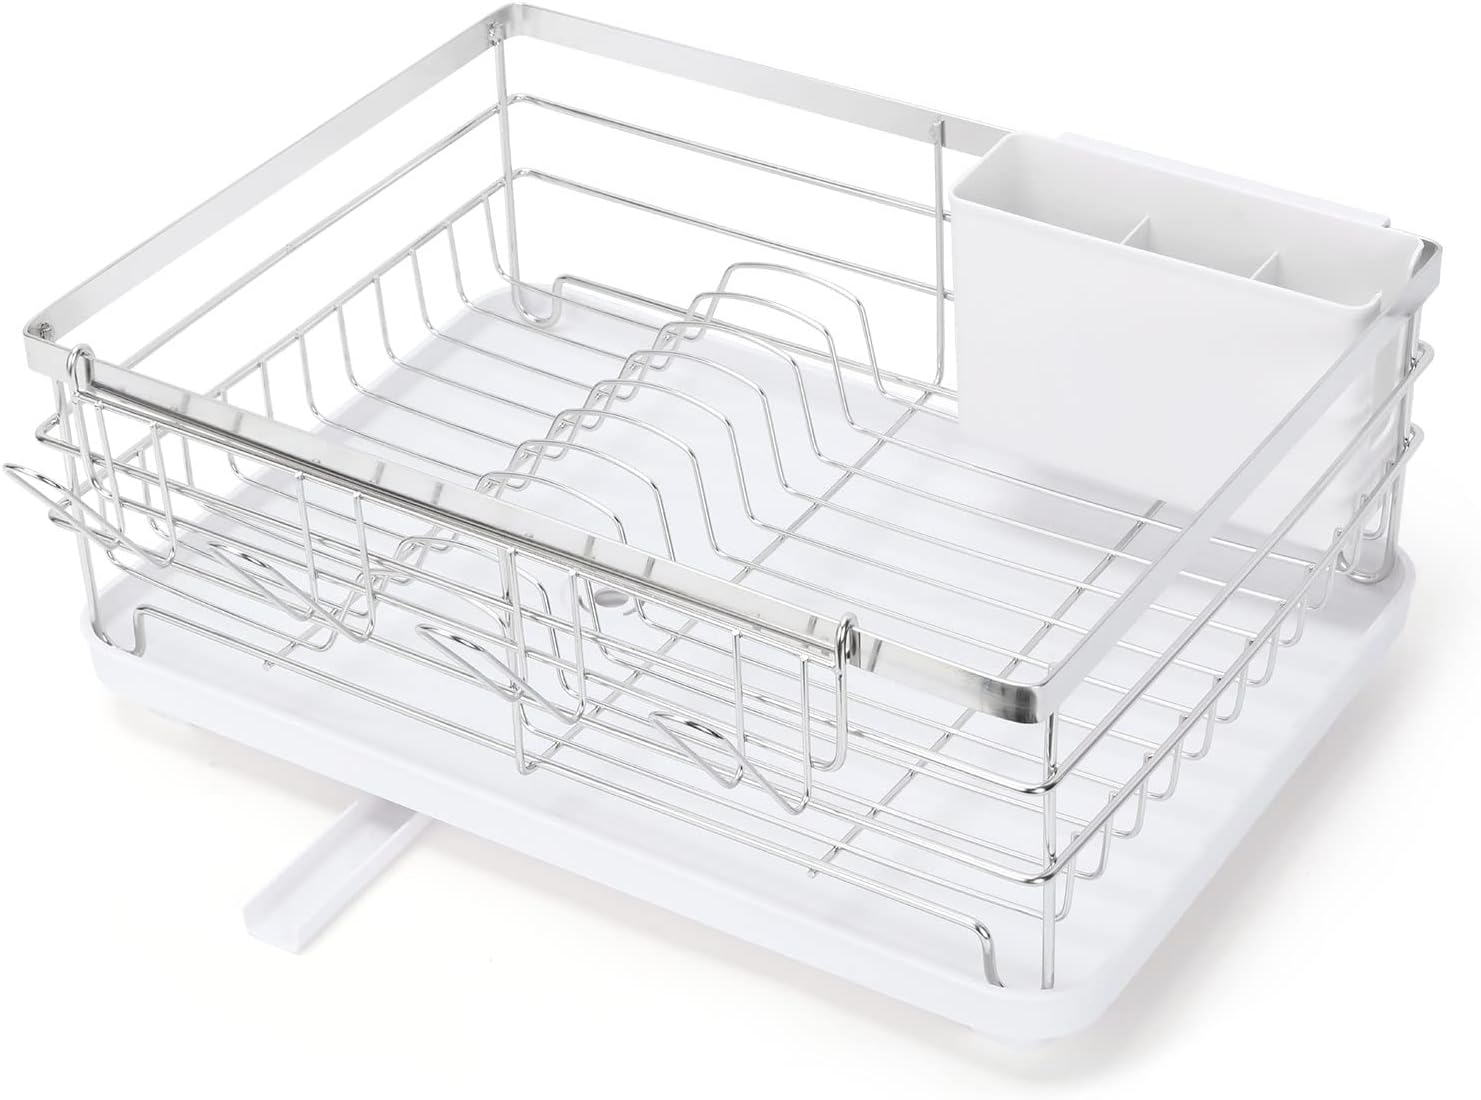 Fogein Dish Drying Rack, Stainless Steel Dish Drainer [...]